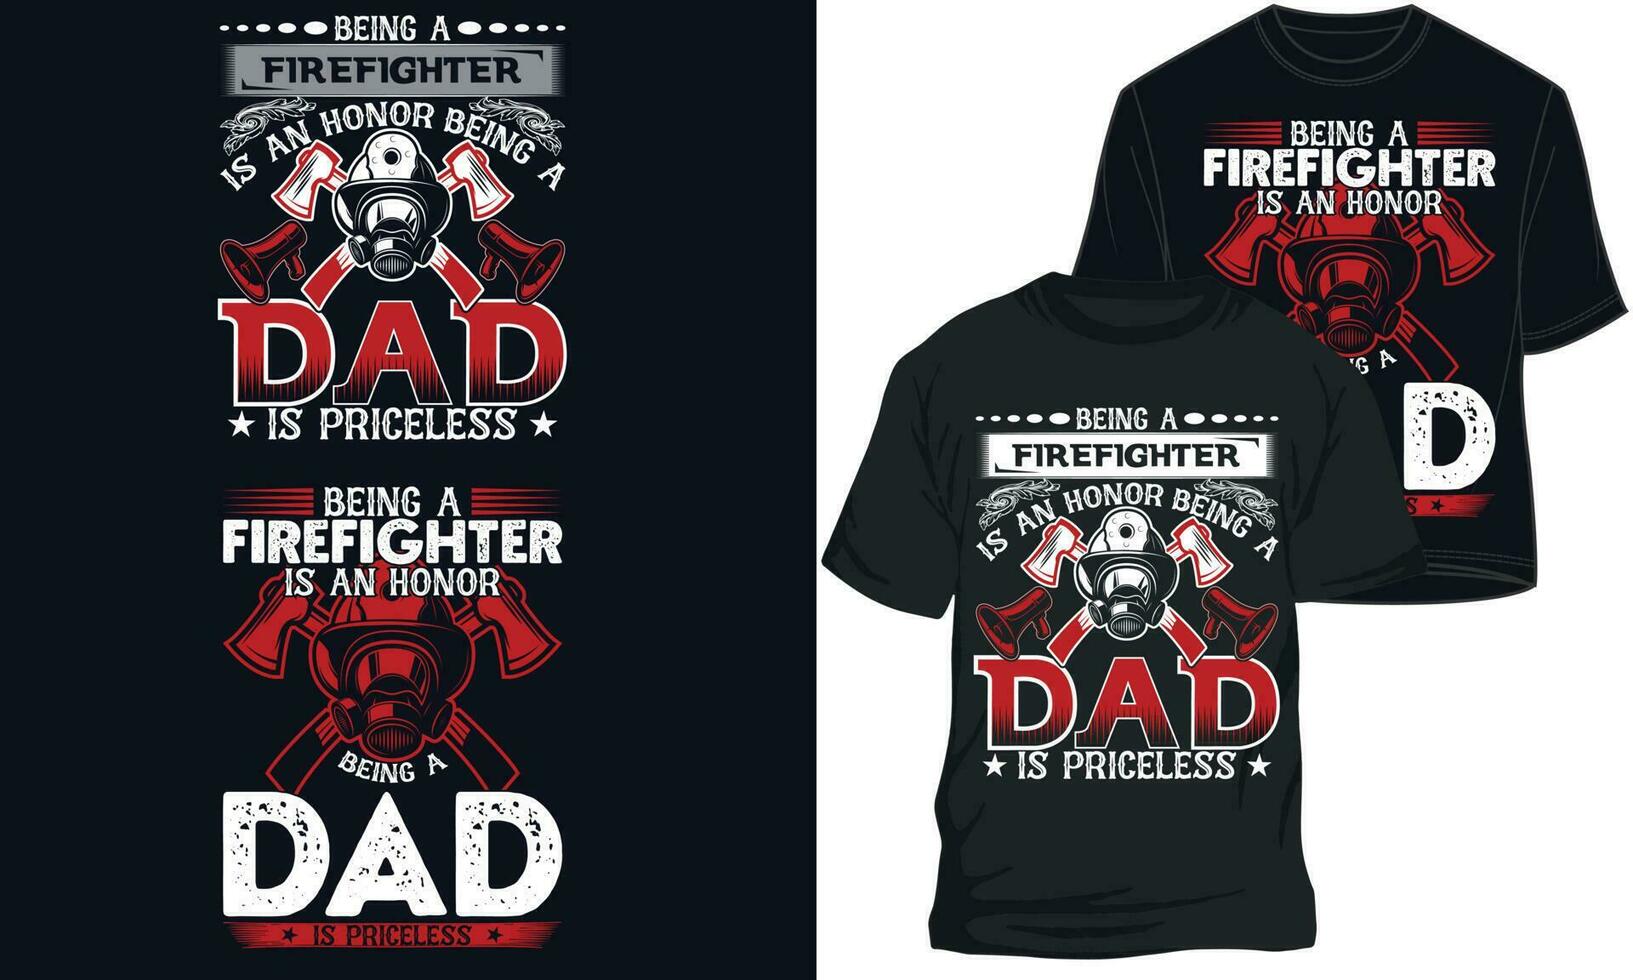 BEING A FIREFIGHTER IS AN HONOR BEING A DAD IS PRICELESS. firefightr t shirt Design vector